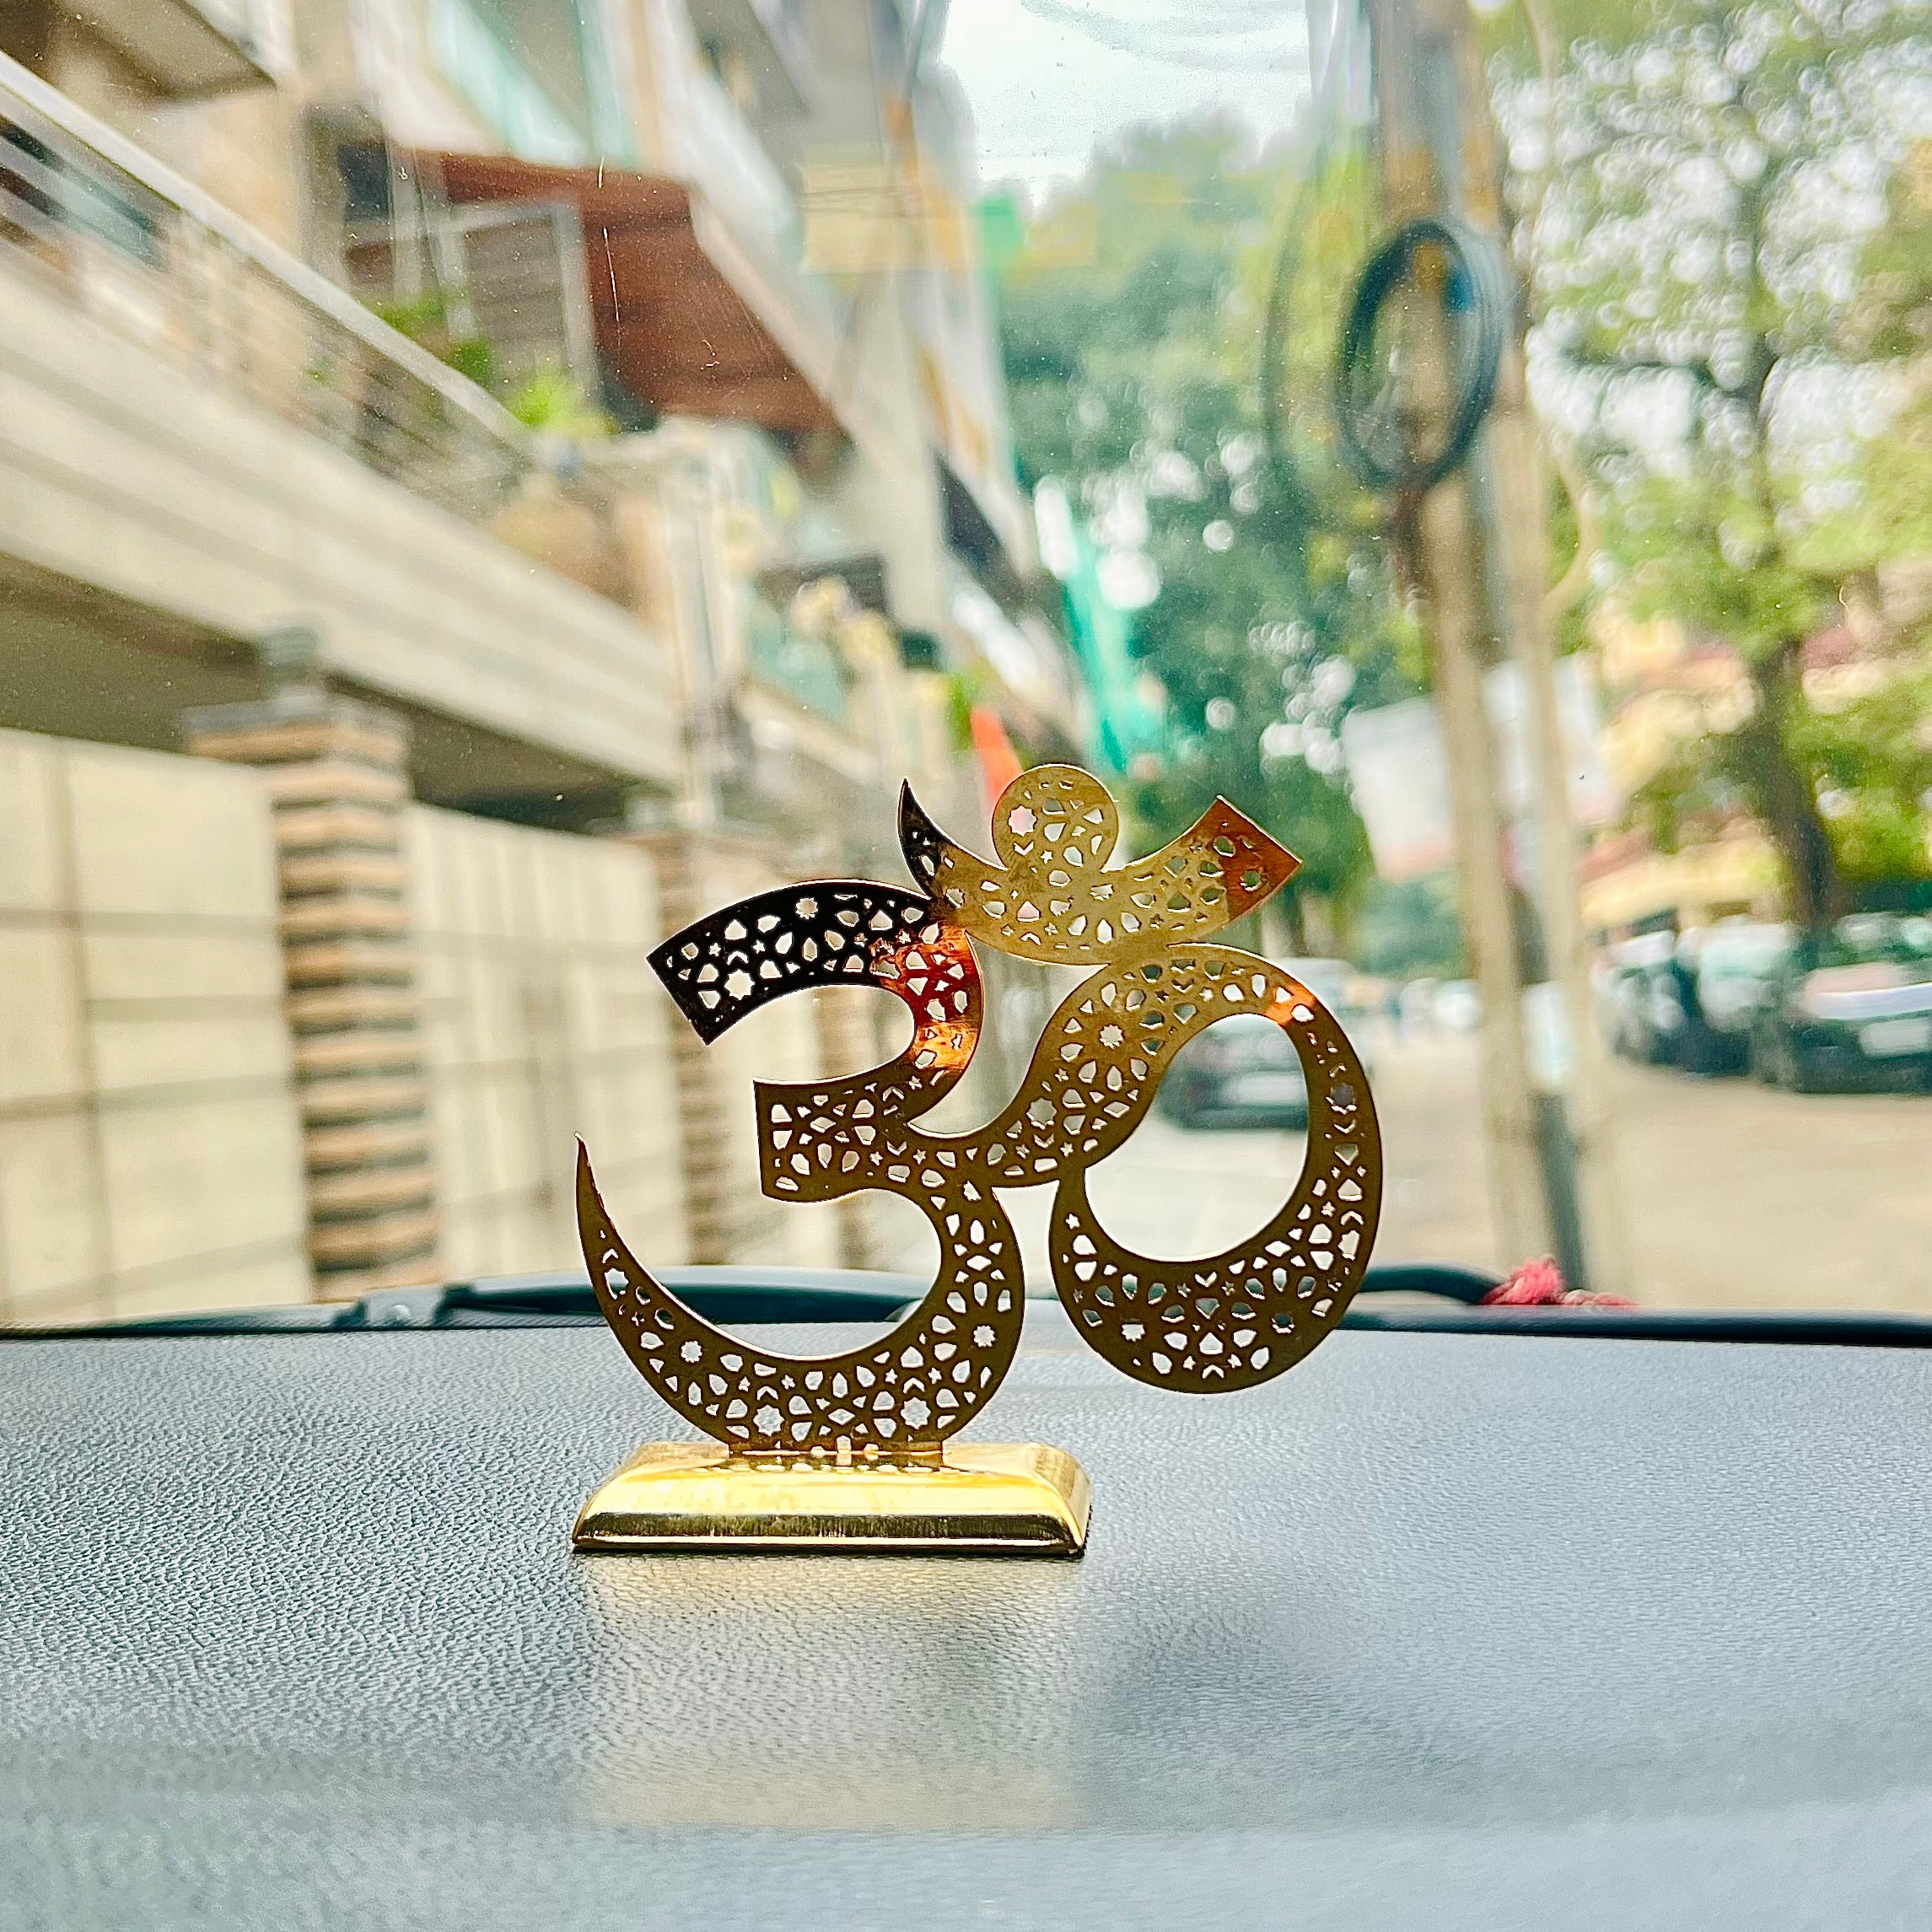 OM echoA beautifully crafted accessory, perfect for adding blessings and grace to your car's dashboard, serving as a decorative centerpiece on your table, or even adding chHindustanwaleOM echo